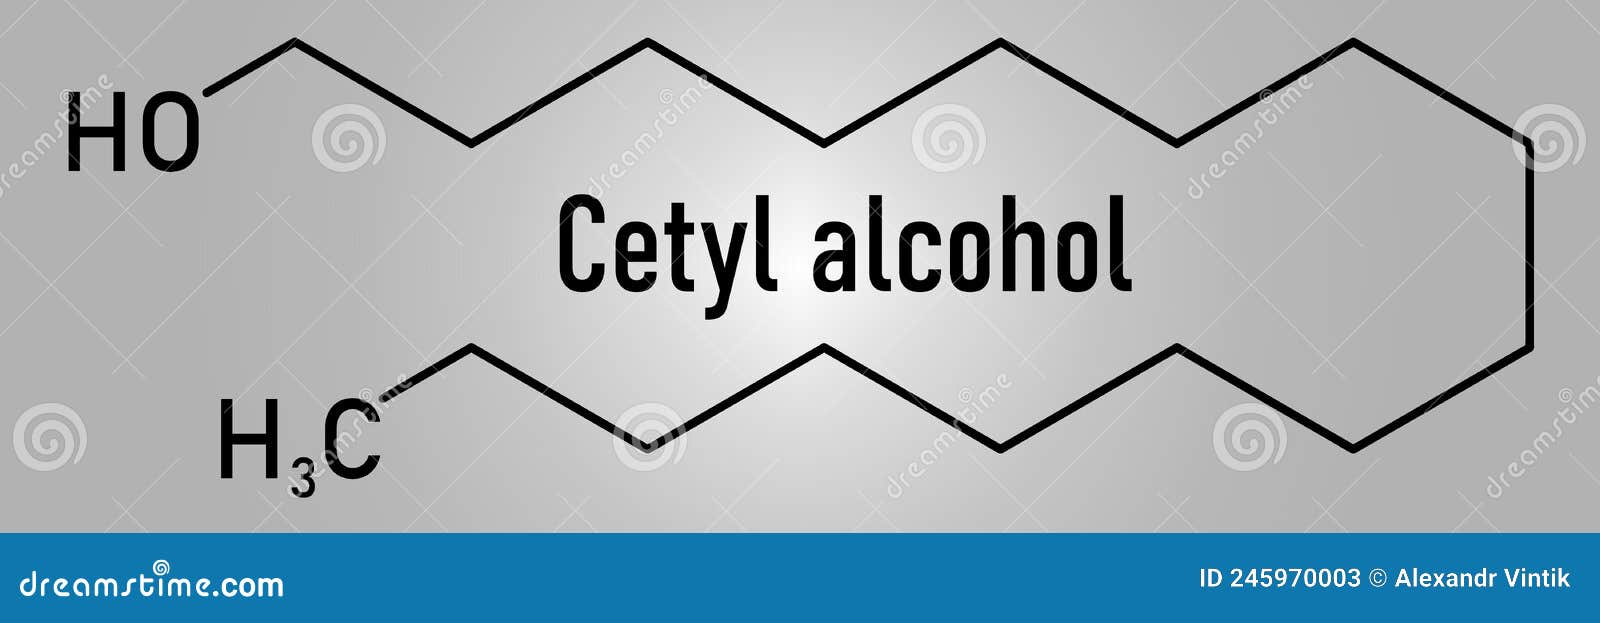 Cetearyl Alcohol Stock Illustrations – 30 Cetearyl Alcohol Stock  Illustrations, Vectors & Clipart - Dreamstime